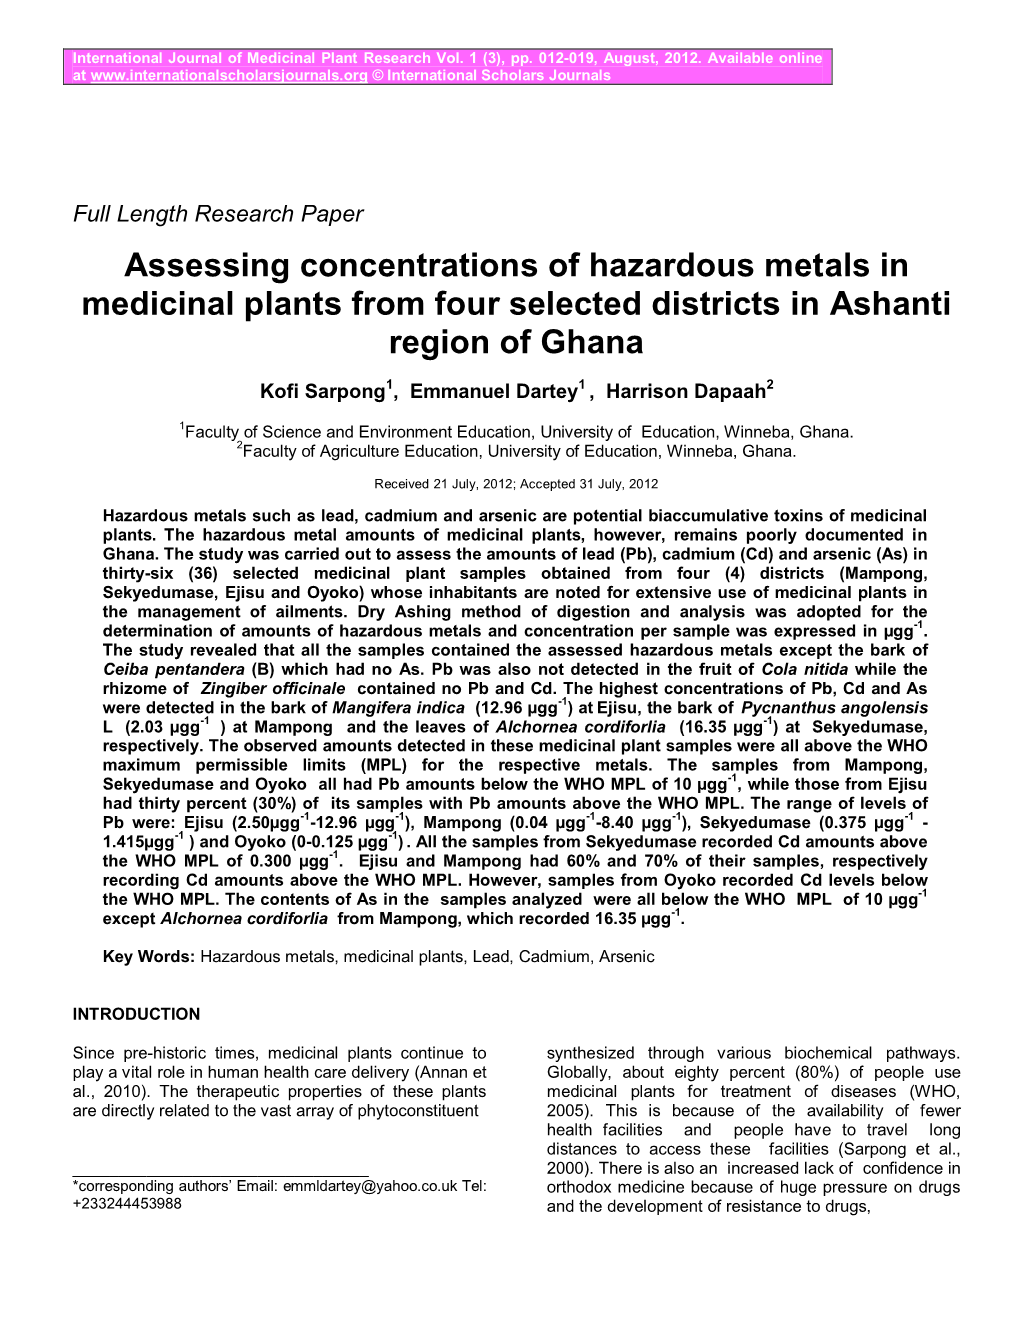 Assessing Concentrations of Hazardous Metals in Medicinal Plants from Four Selected Districts in Ashanti Region of Ghana